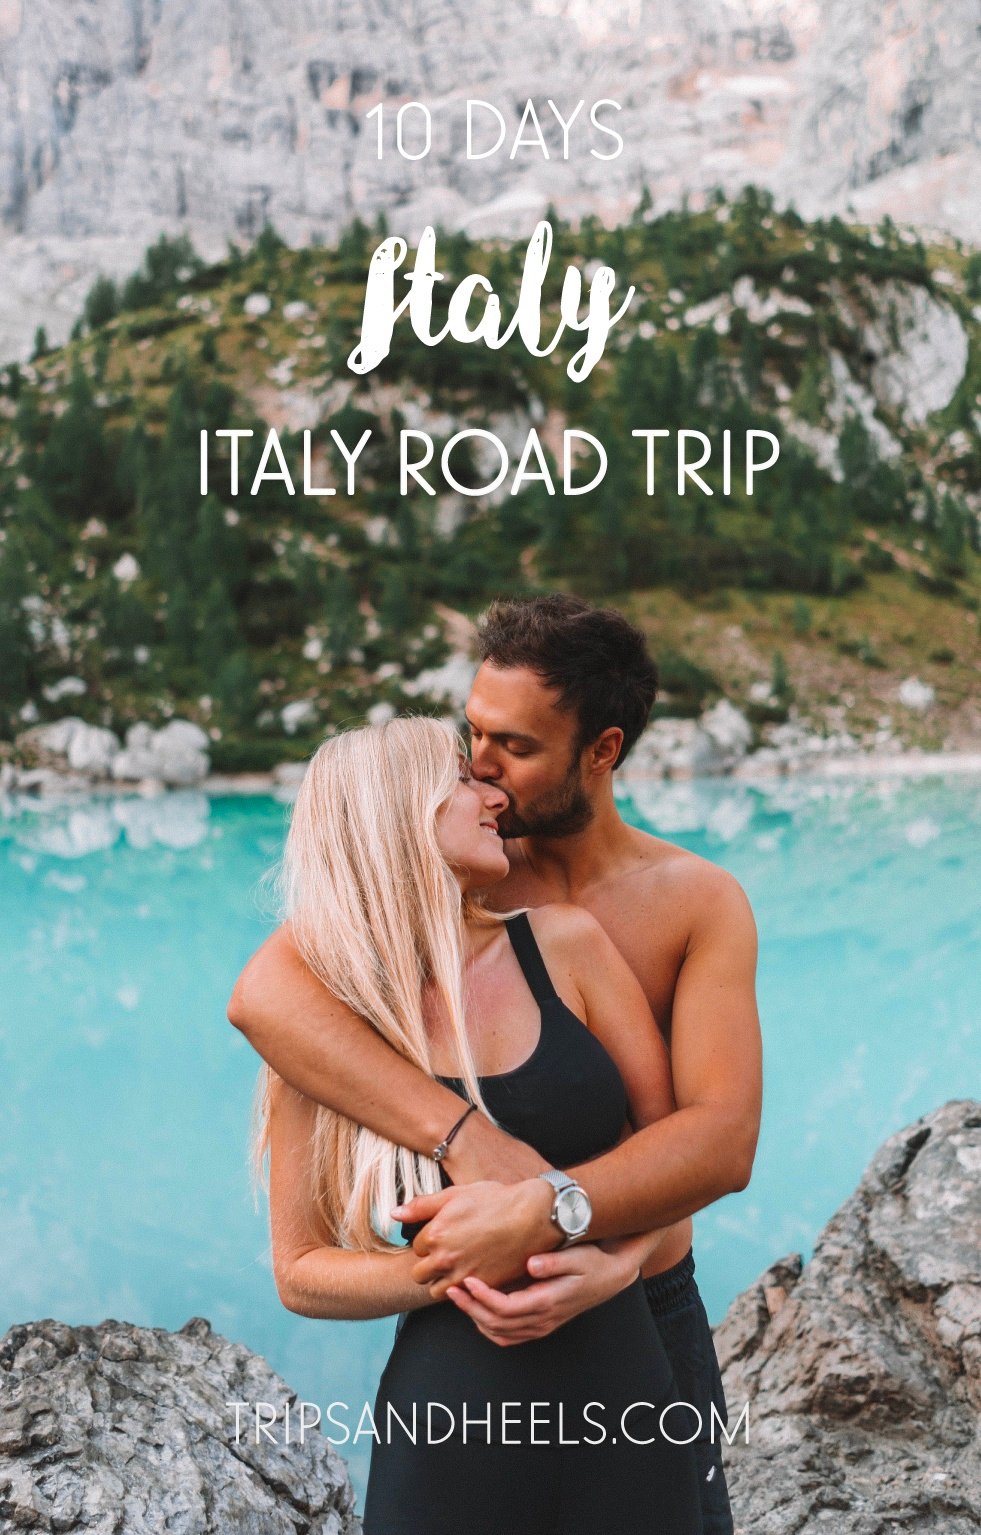 10 days Italy road trip